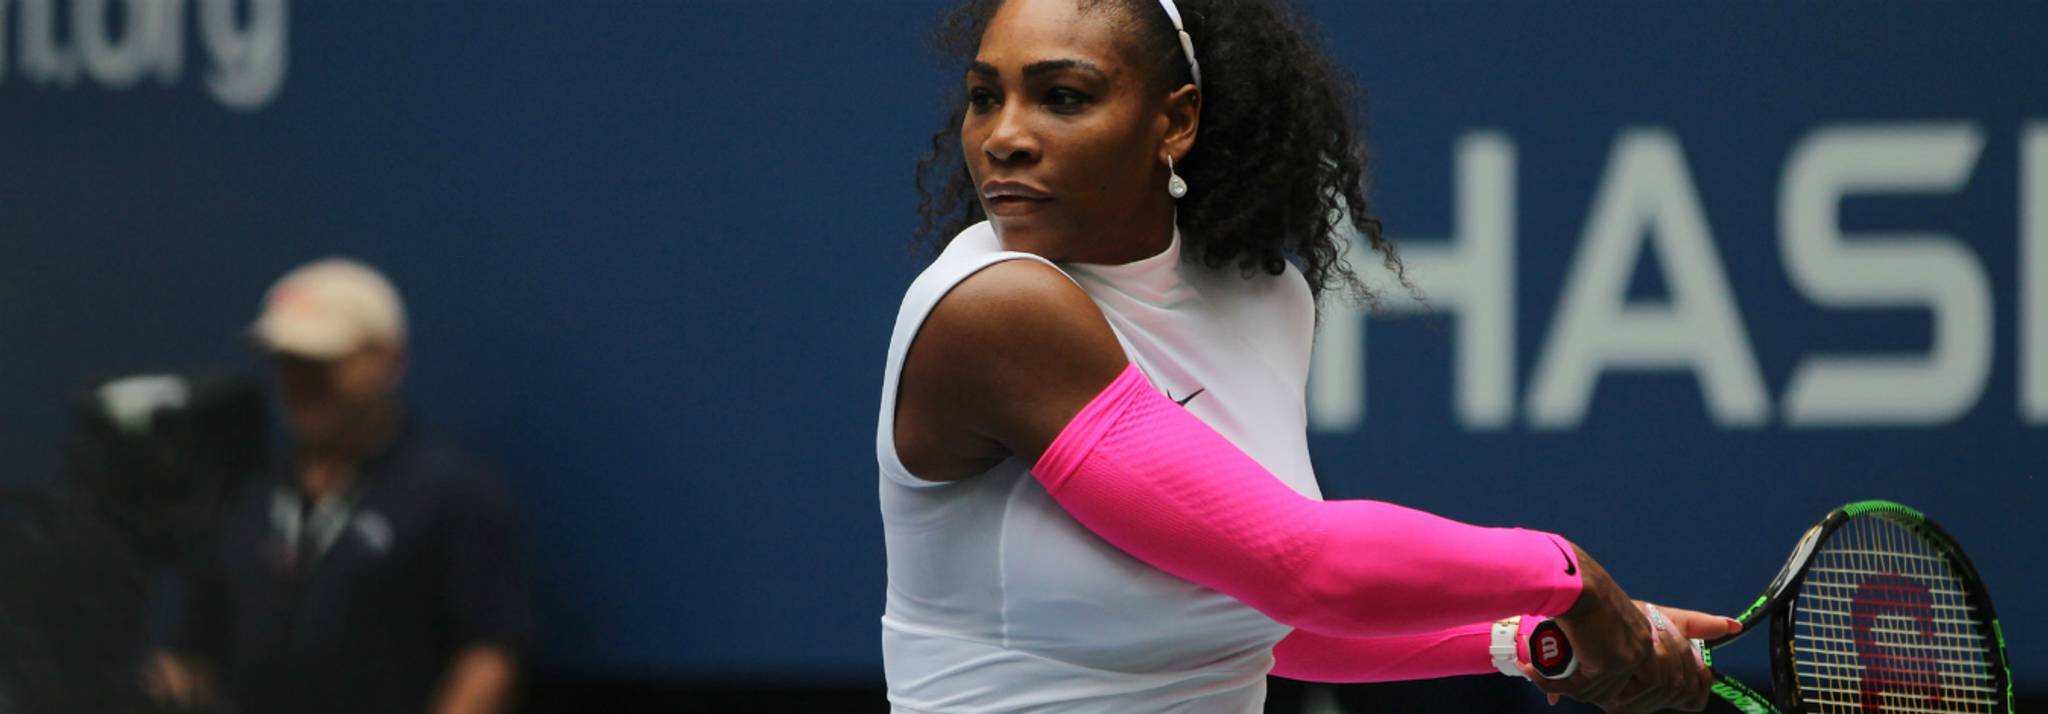 Why tennis is the most empowering female sport